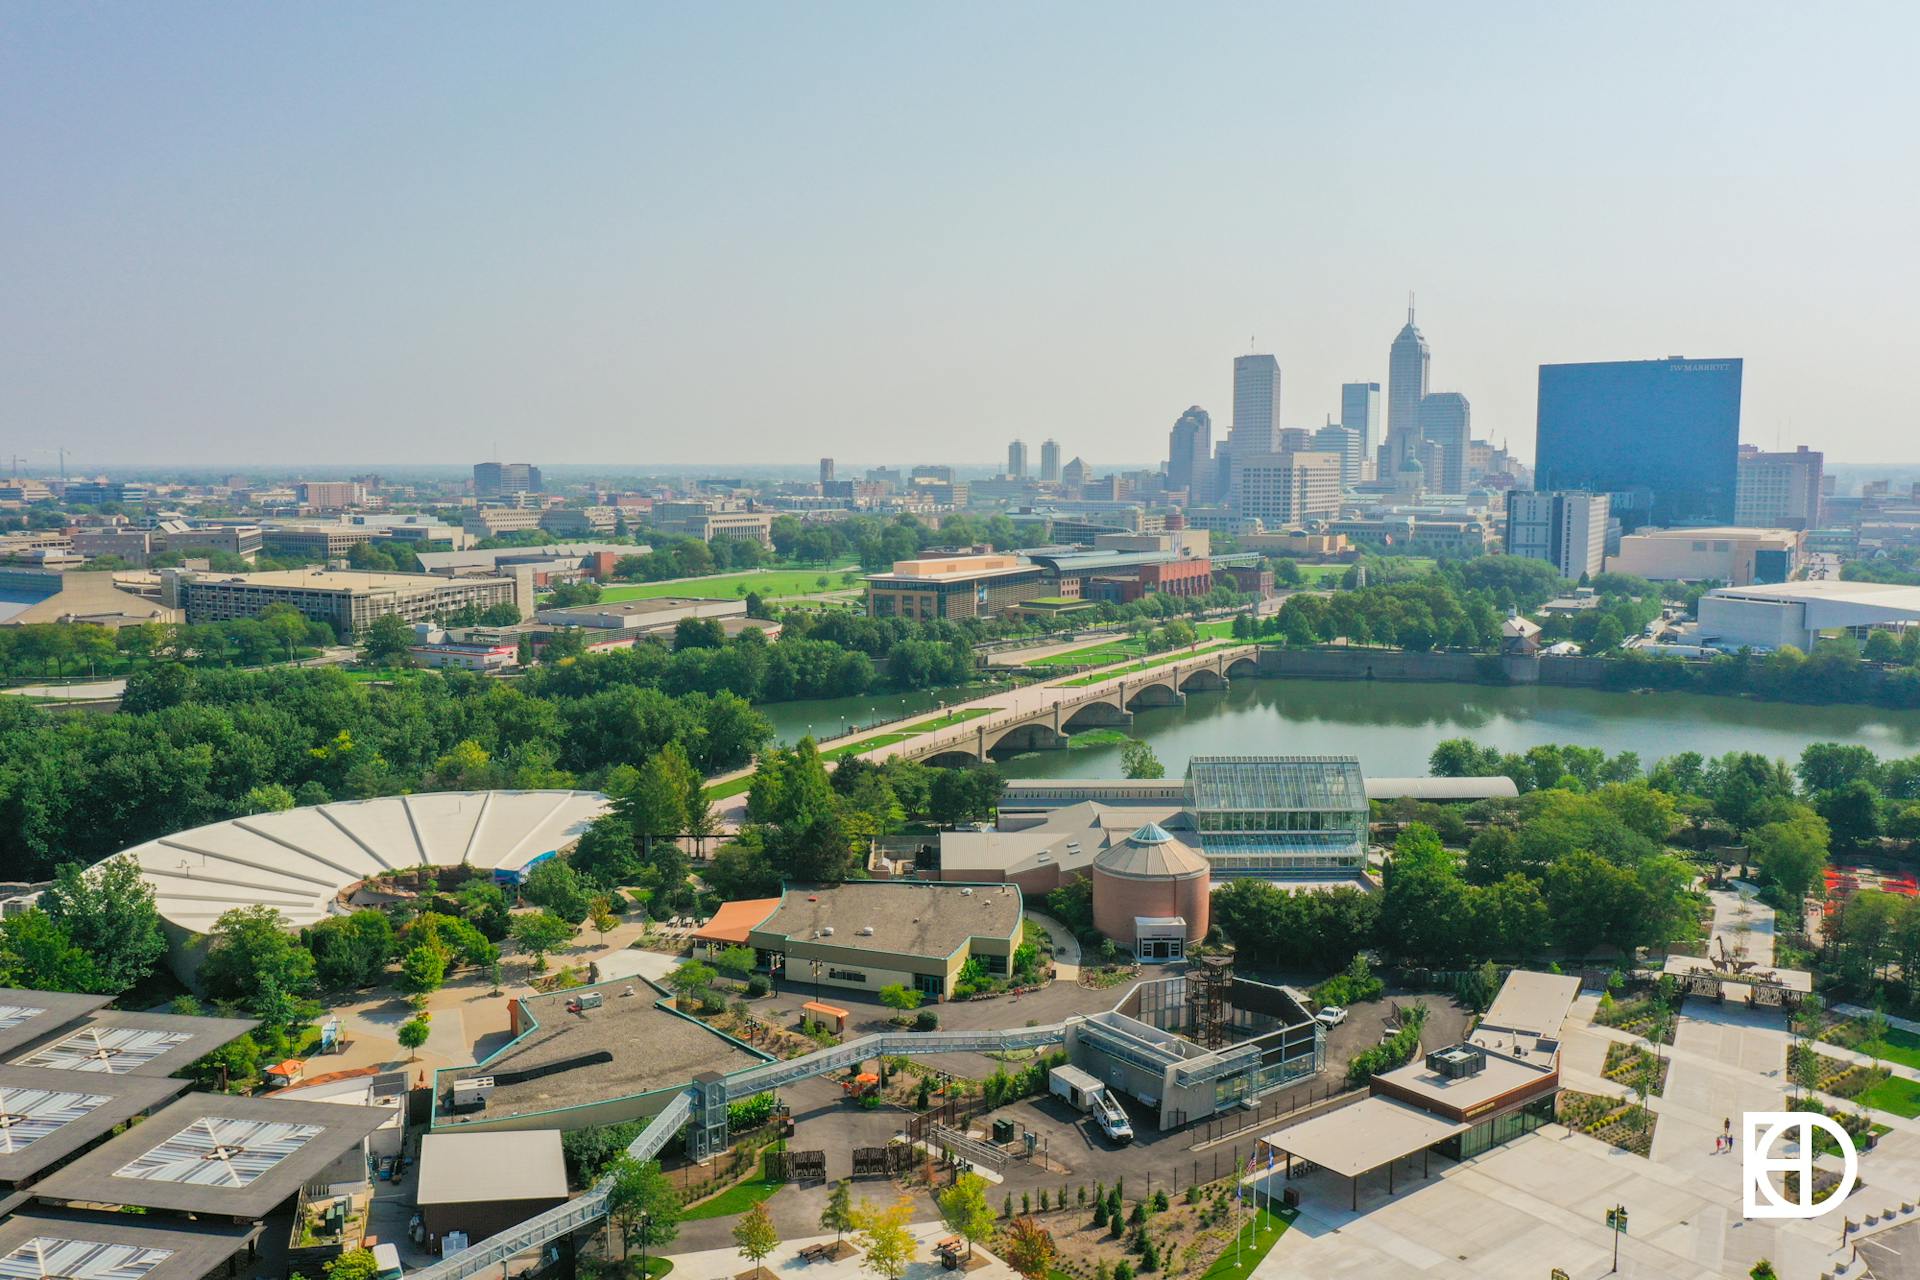 Aerial photo of the Indianapolis Zoo, with a view of Downtown Indianapolis